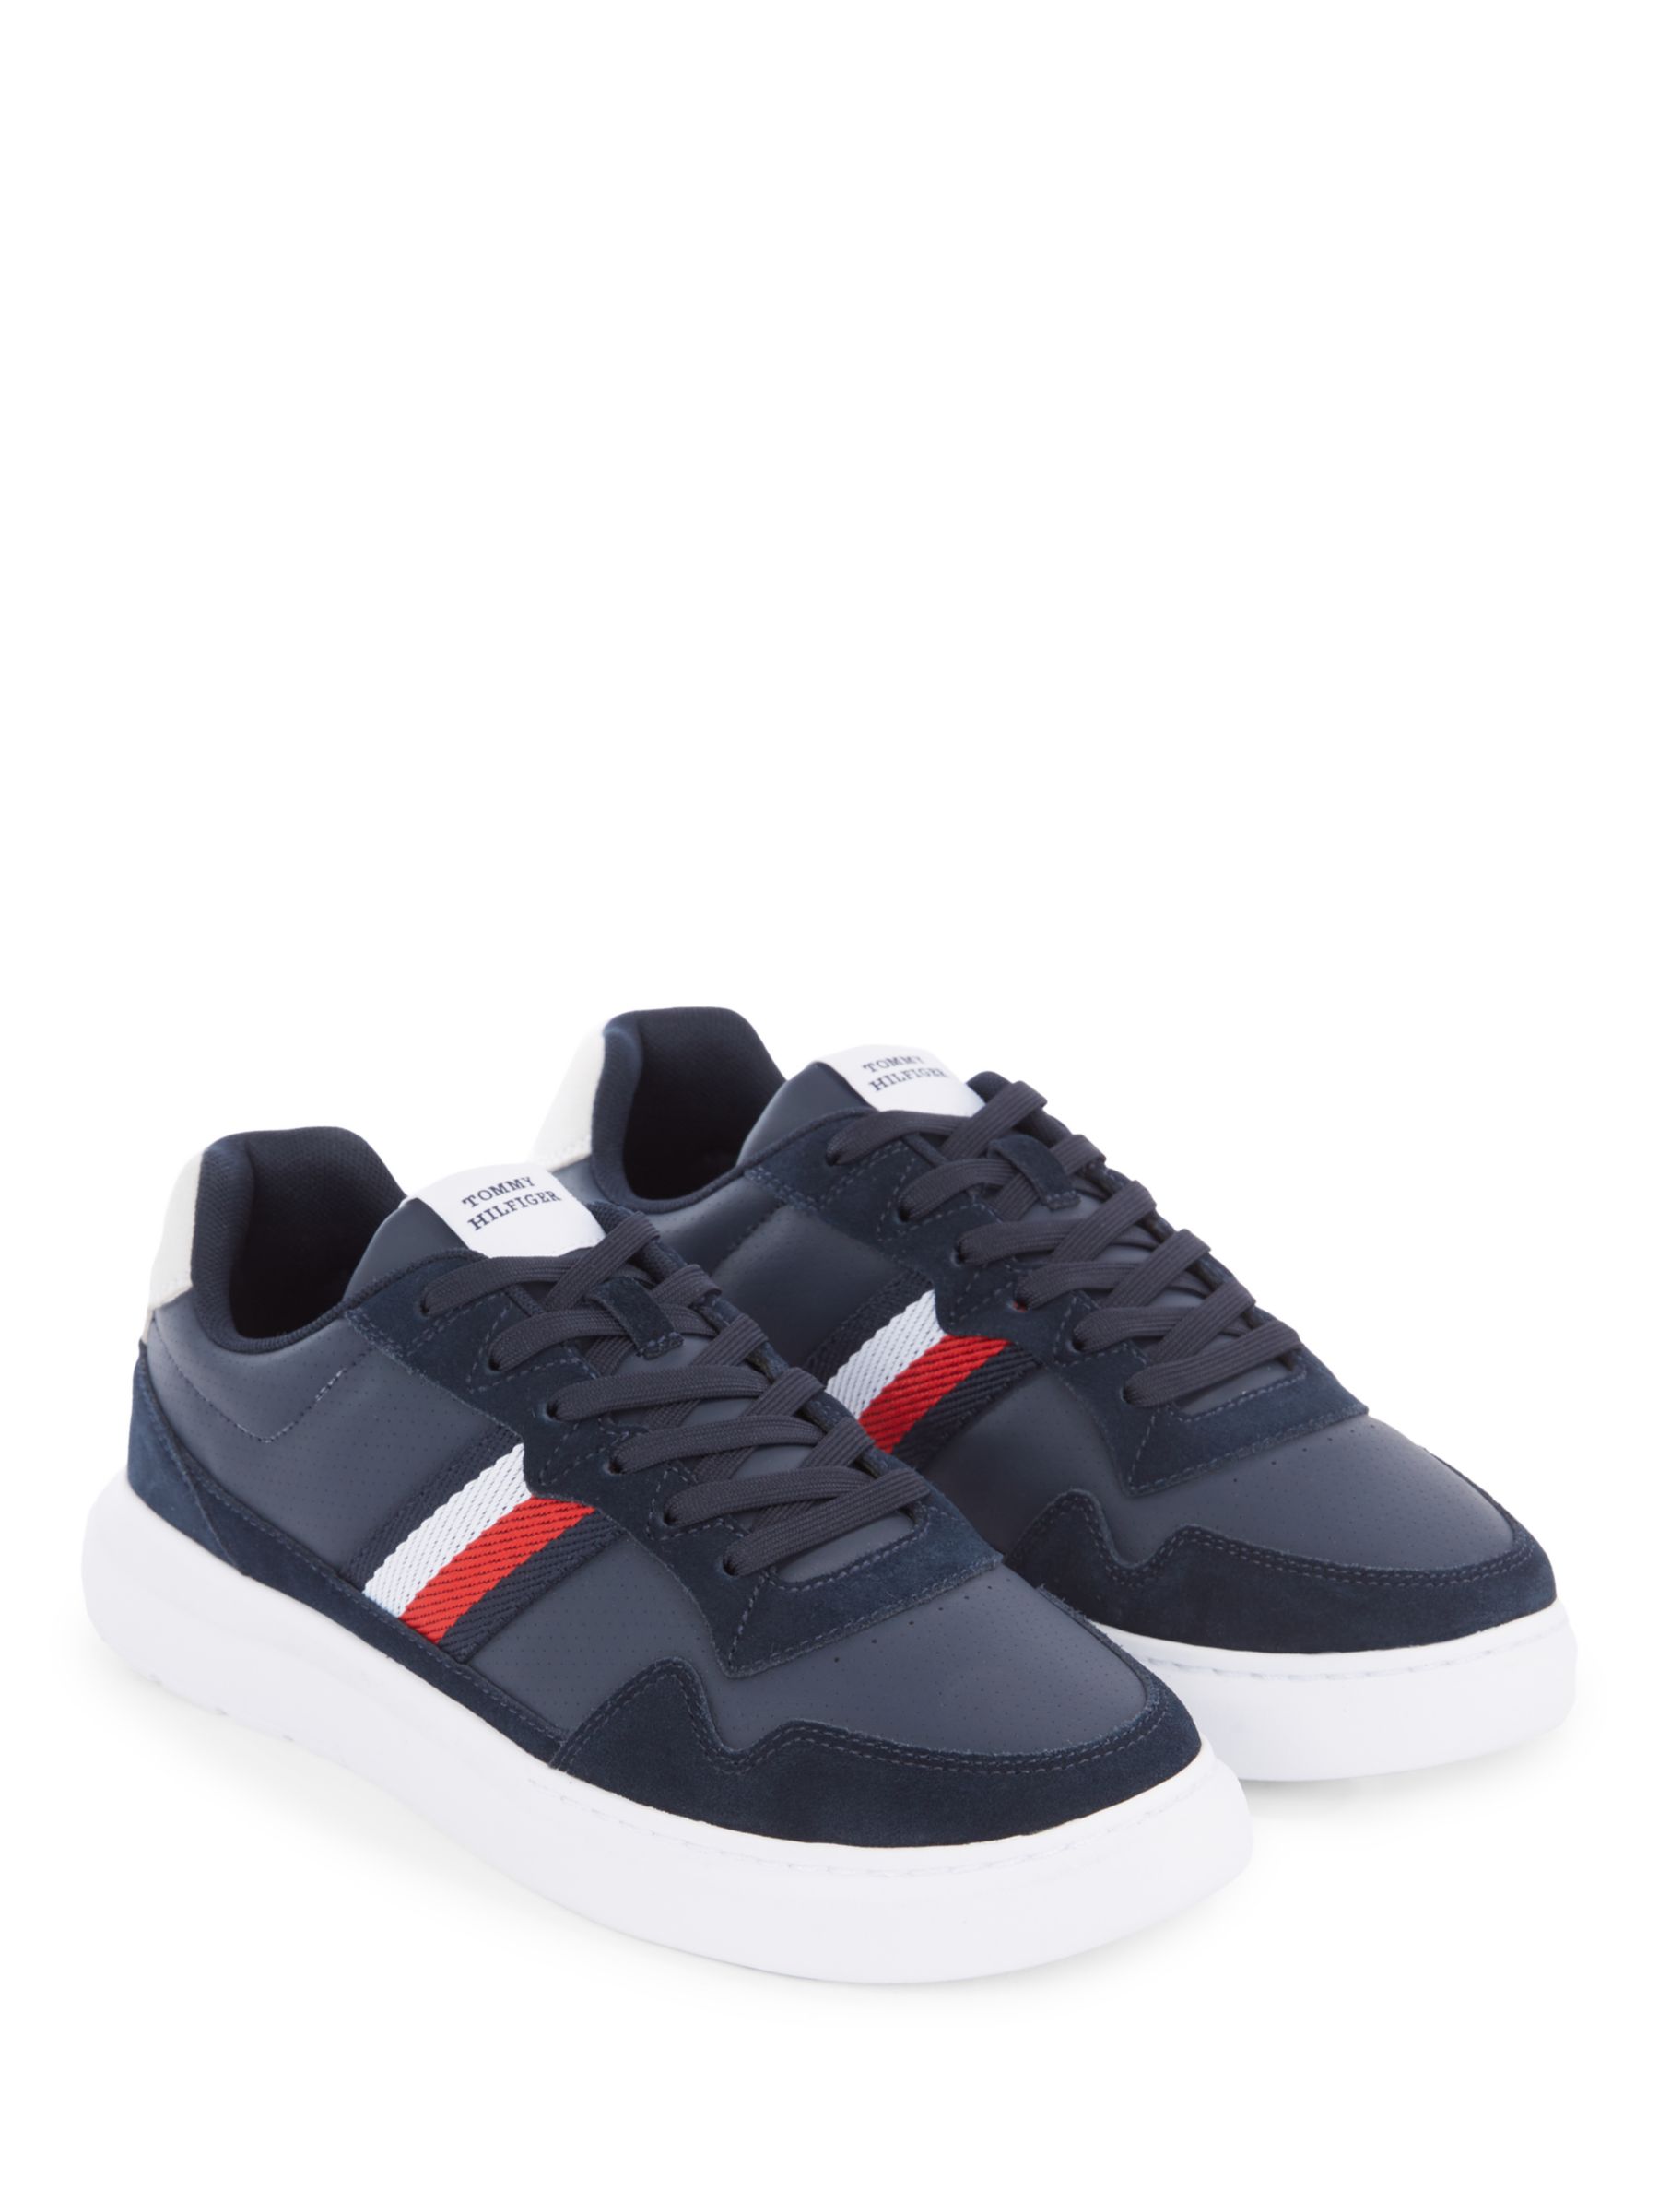 Buy Tommy Hilfiger Leather TH Trainers, Desert Sky Online at johnlewis.com